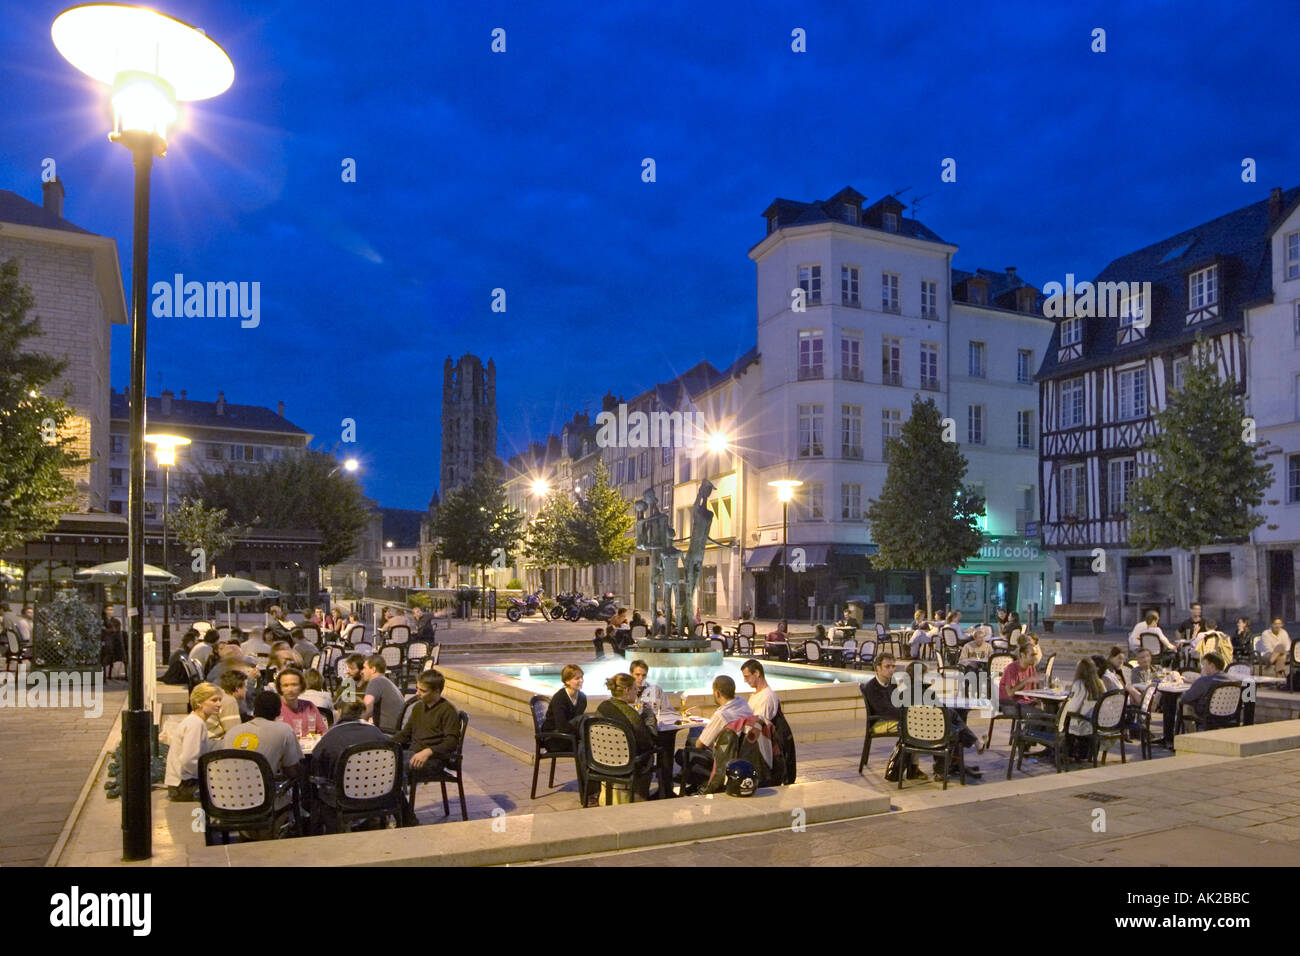 Restaurant at night near the Musee des Beaux Arts, Rouen, Normandy, France Stock Photo